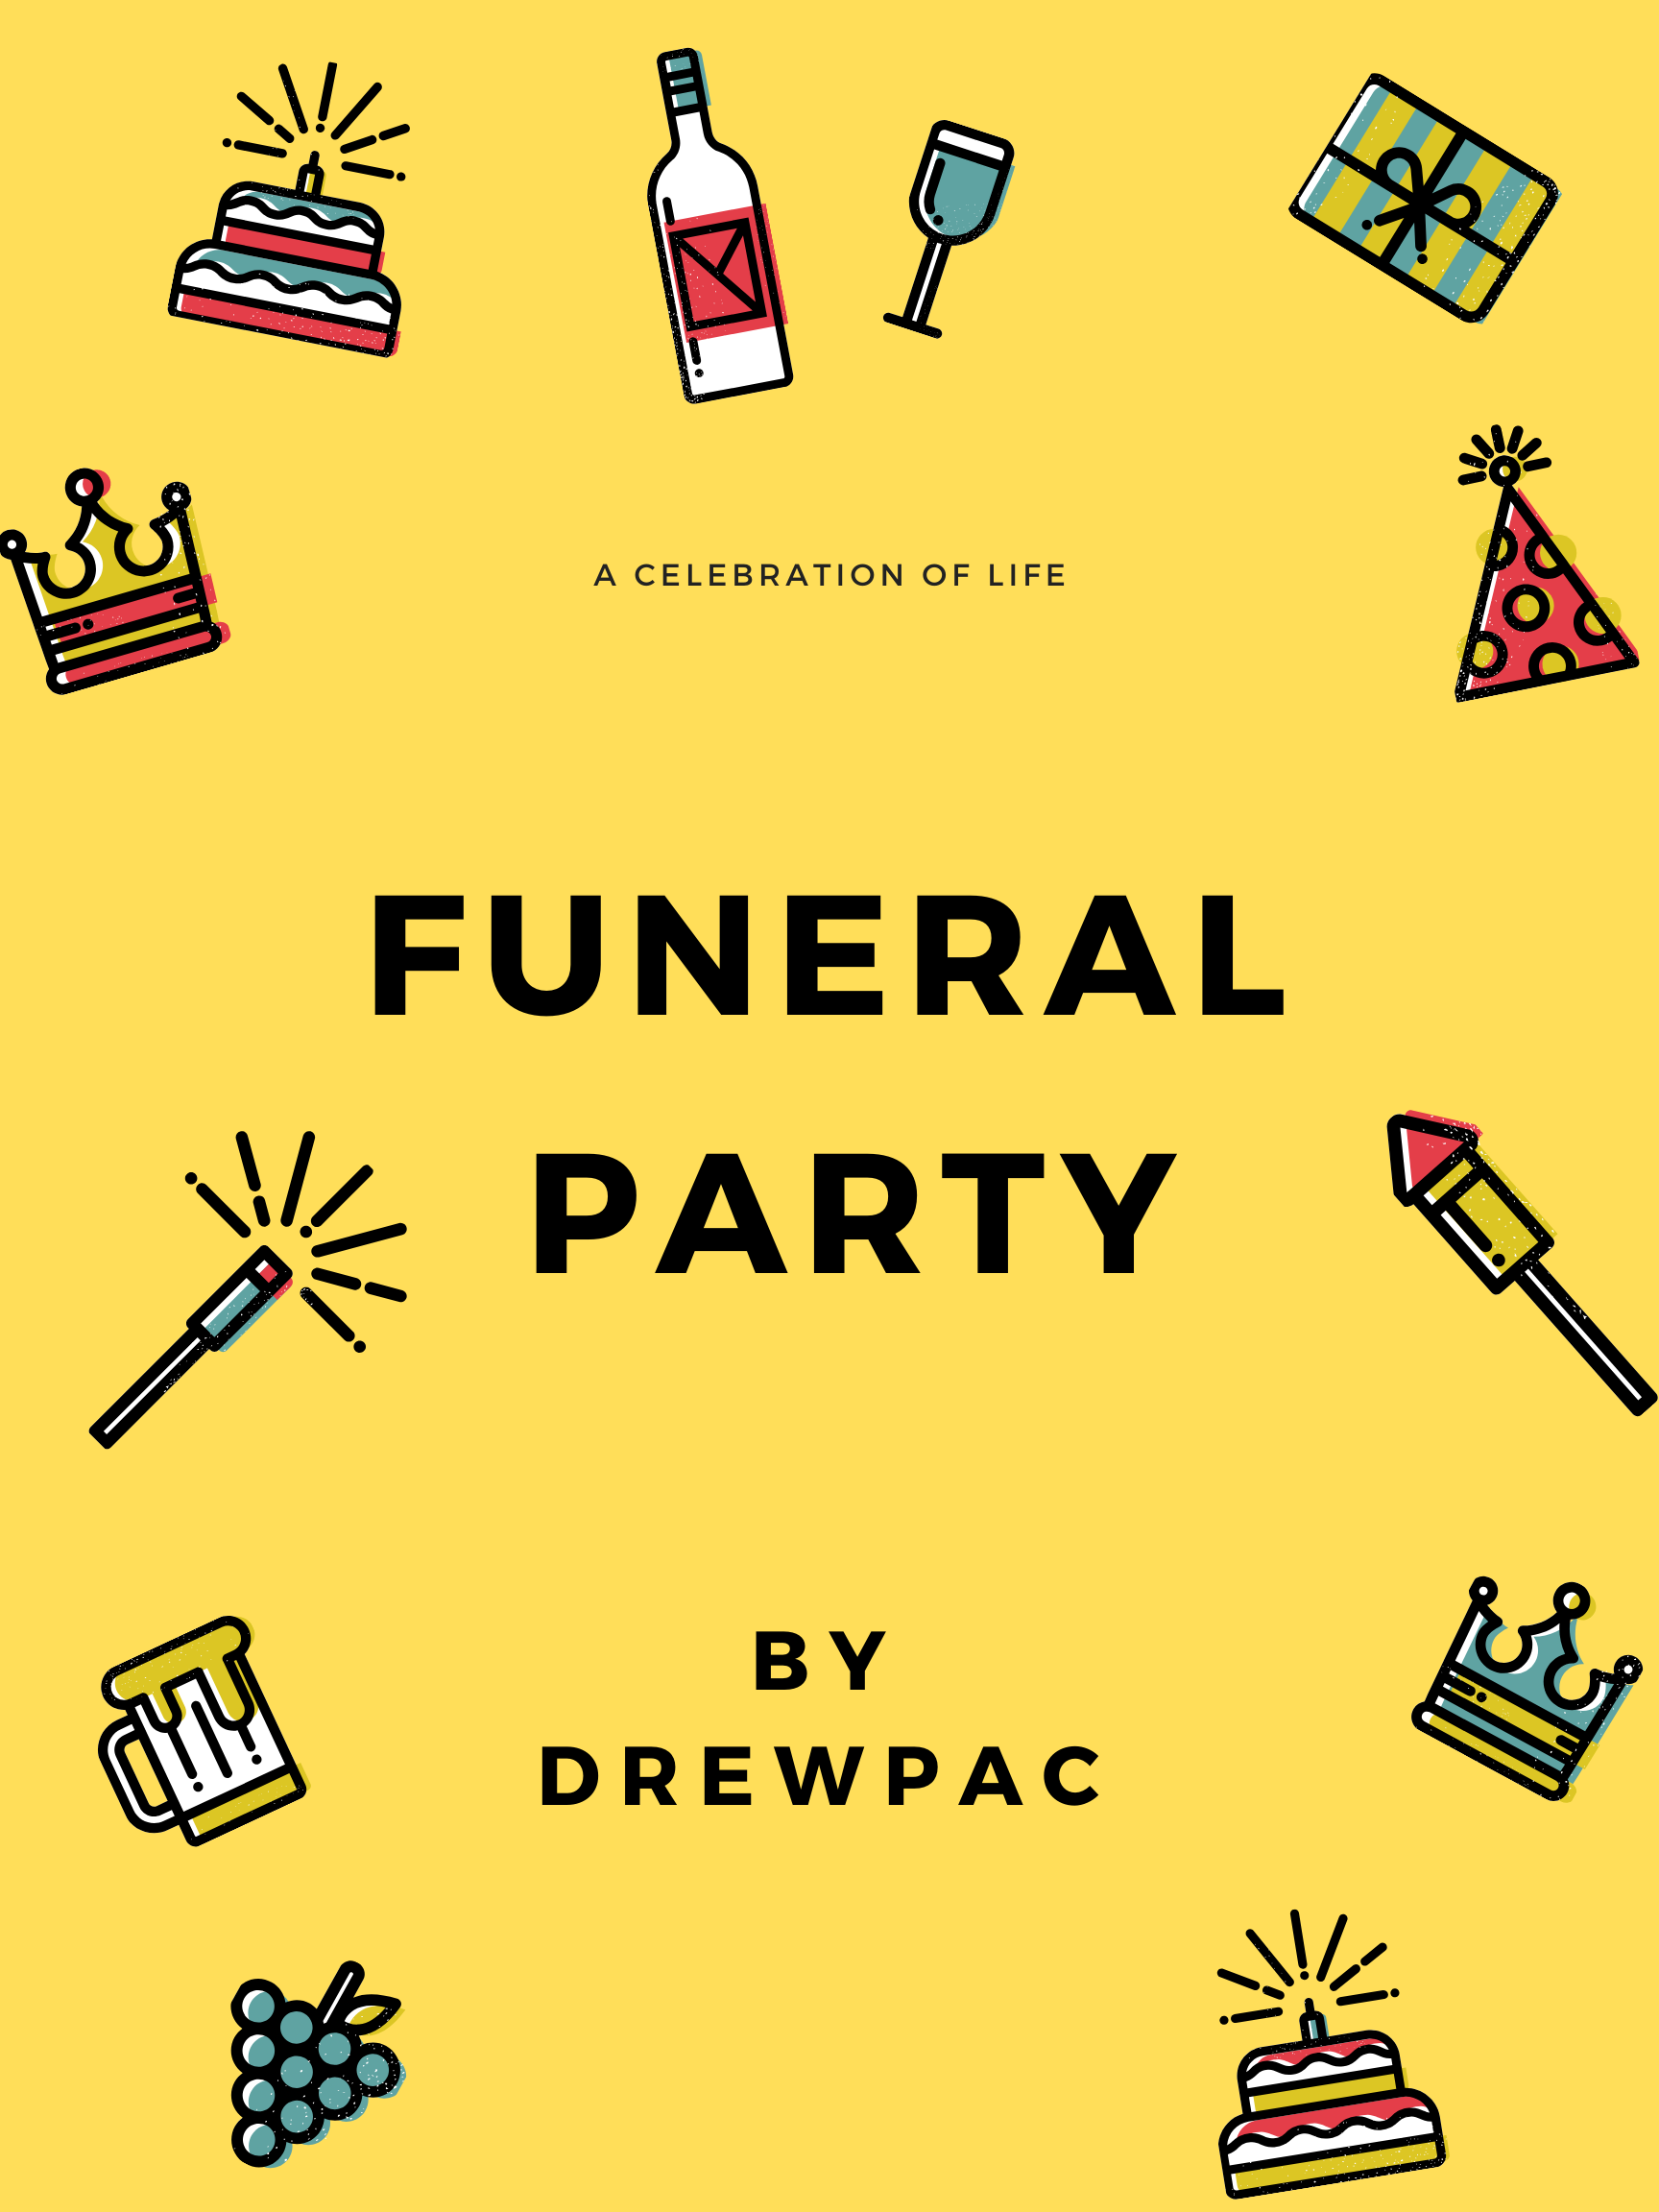 FUNERAL PARTY 